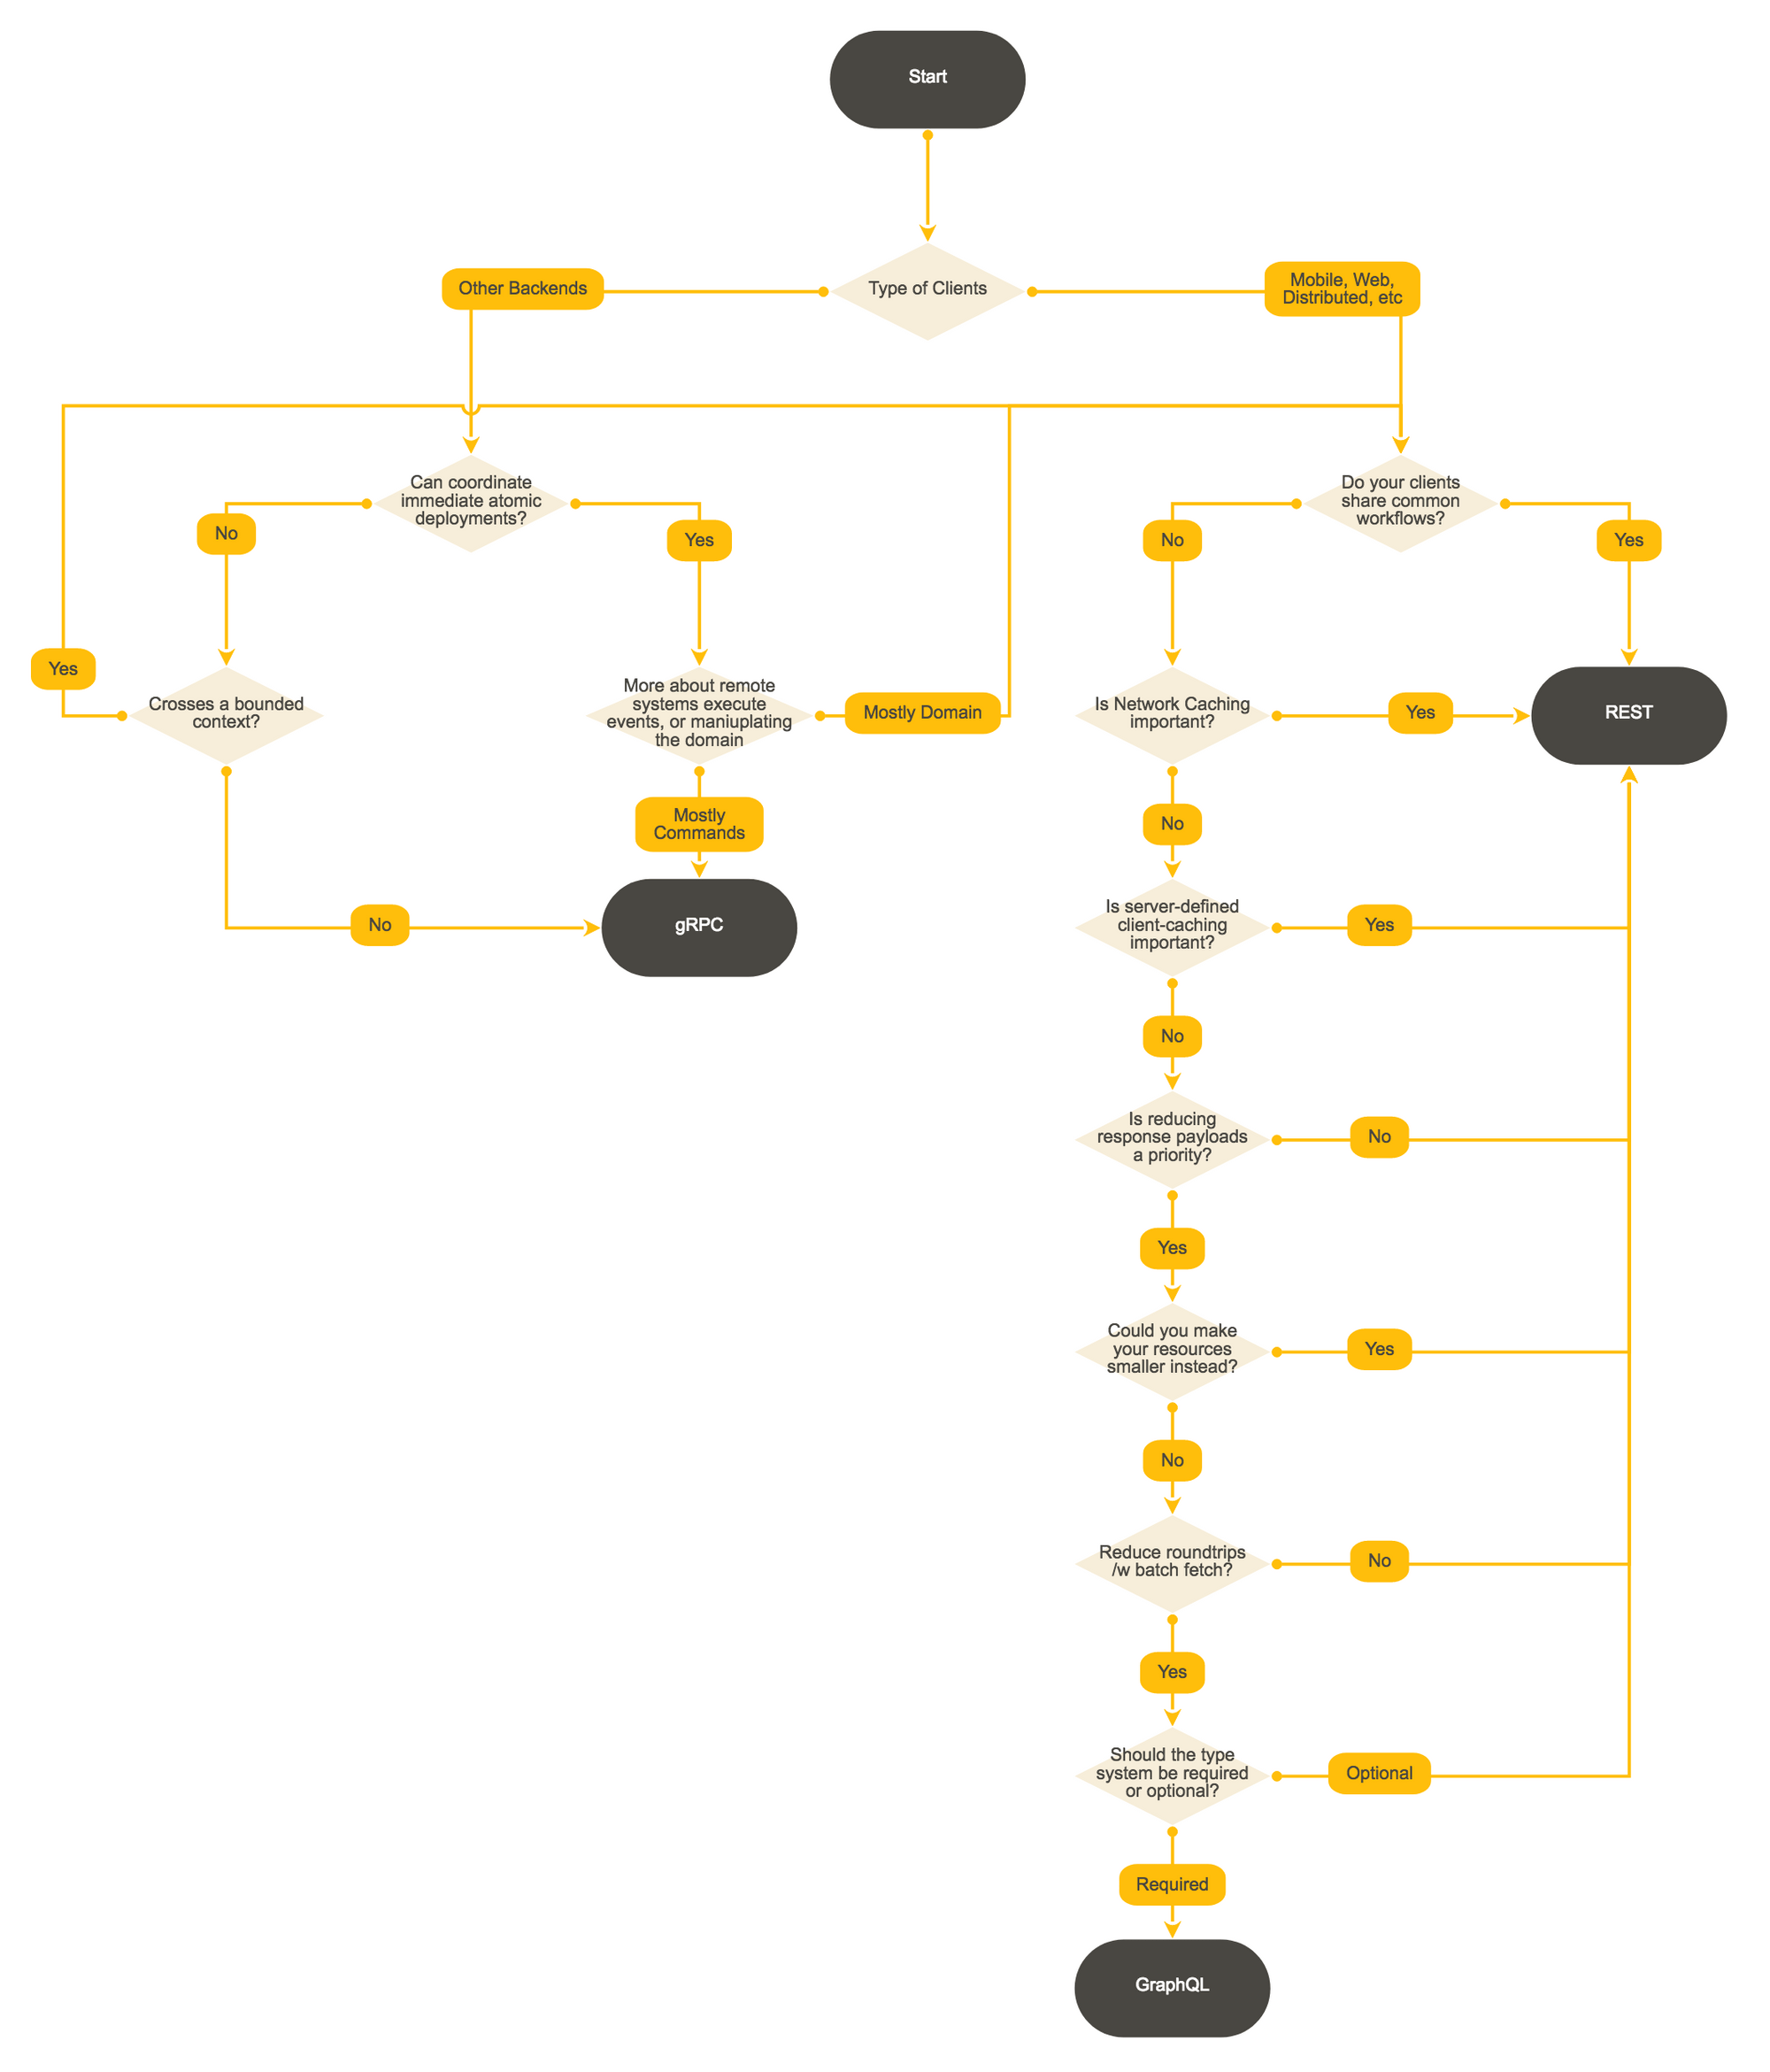 Decision flow diagram for picking between gRPC, REST or GraphQL